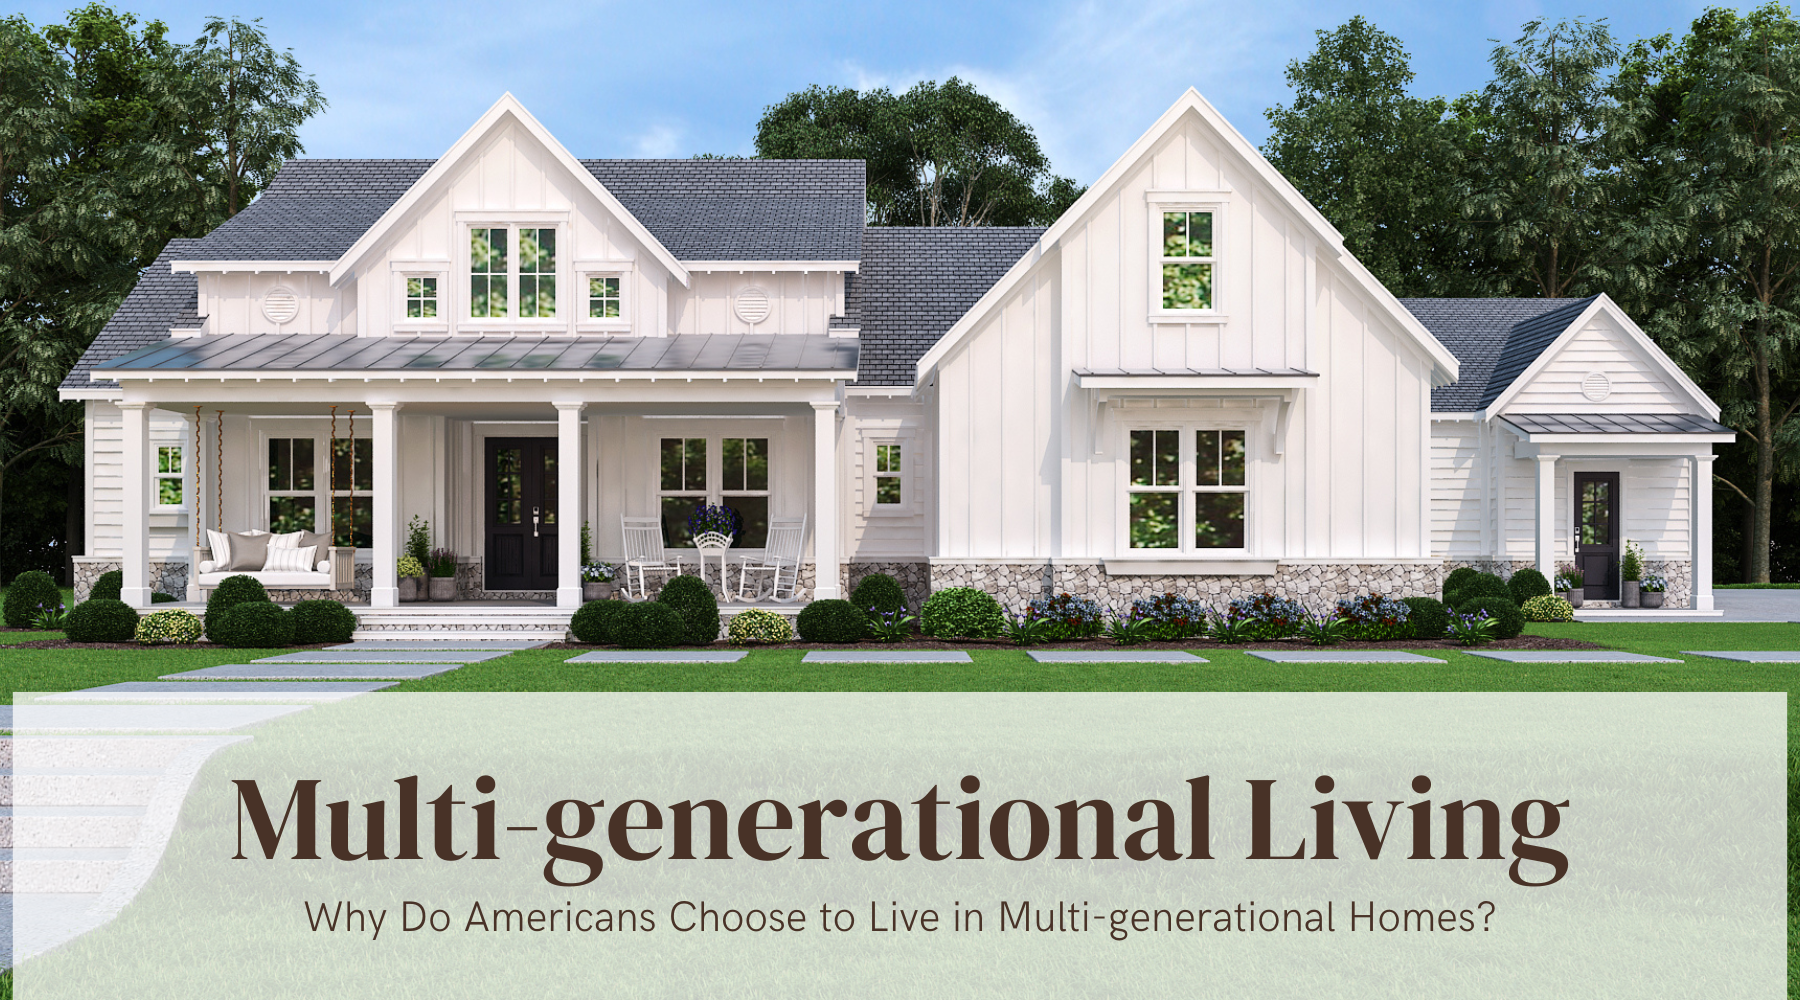 Why do Americans choose to Live in Multi-generational Homes?